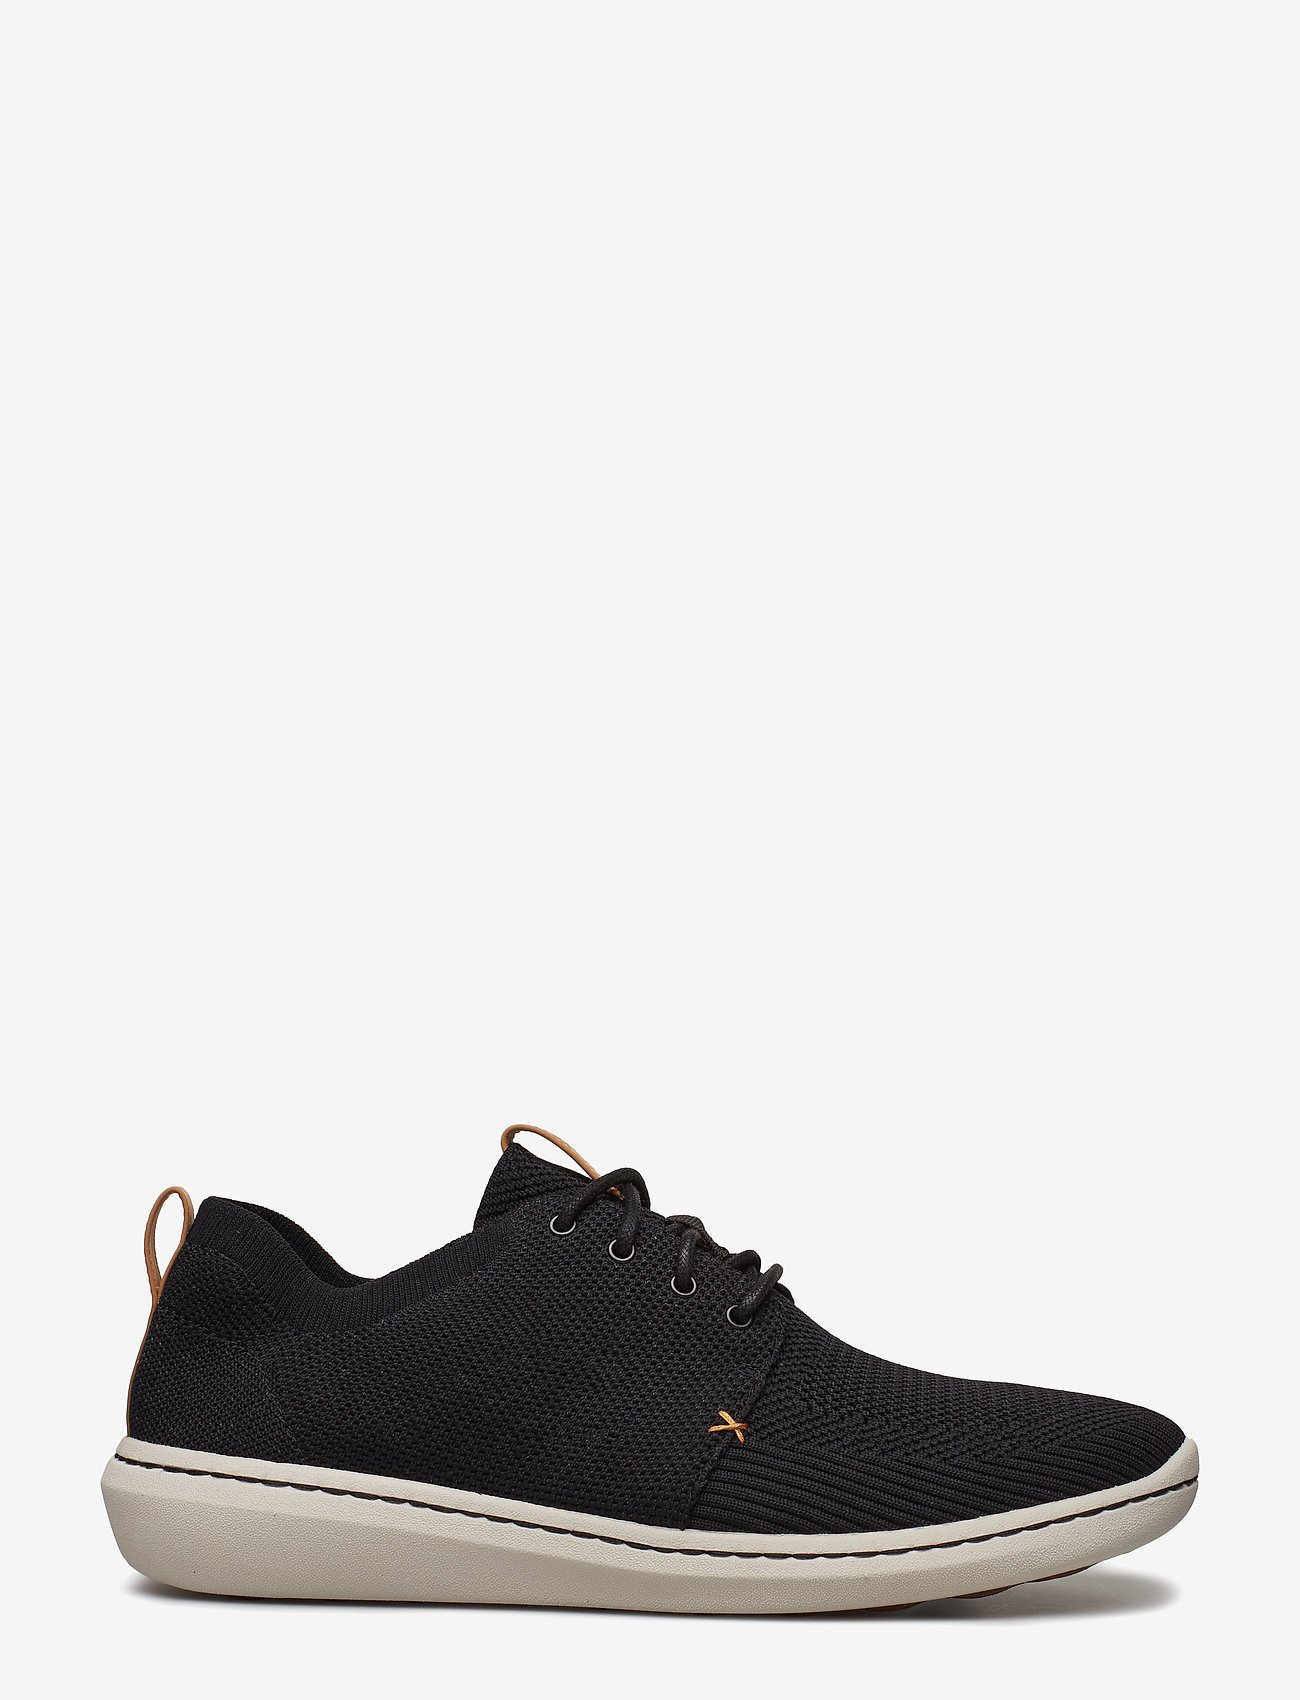 Clarks - Step Urban Mix G - laag sneakers - 1001 black - 1